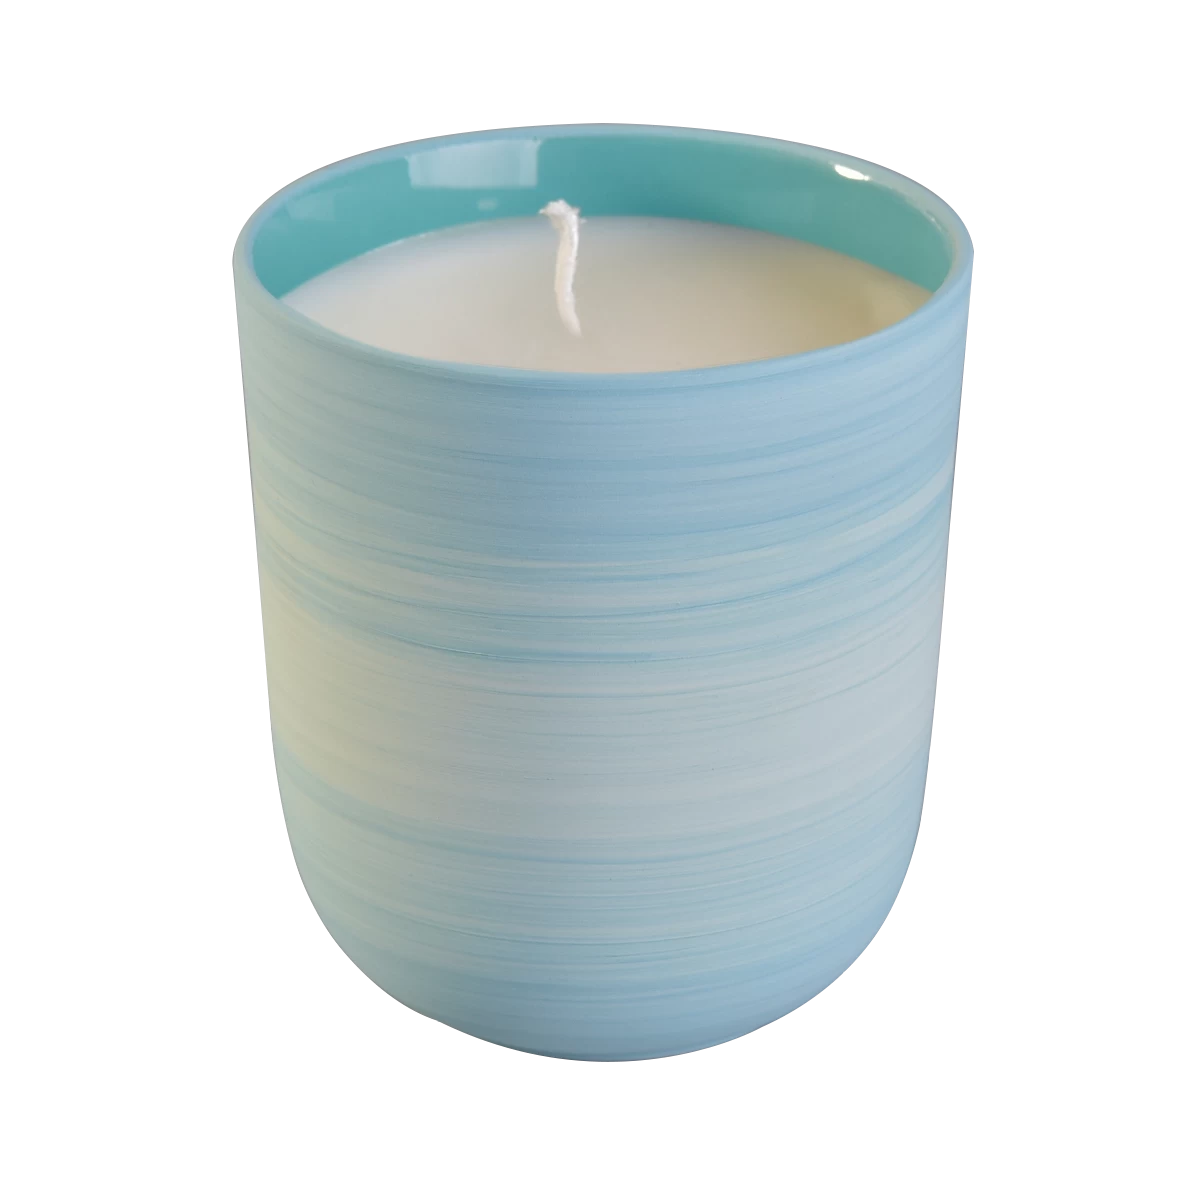 China 10oz Ceramic Candle Holder With Spray Colors manufacturer